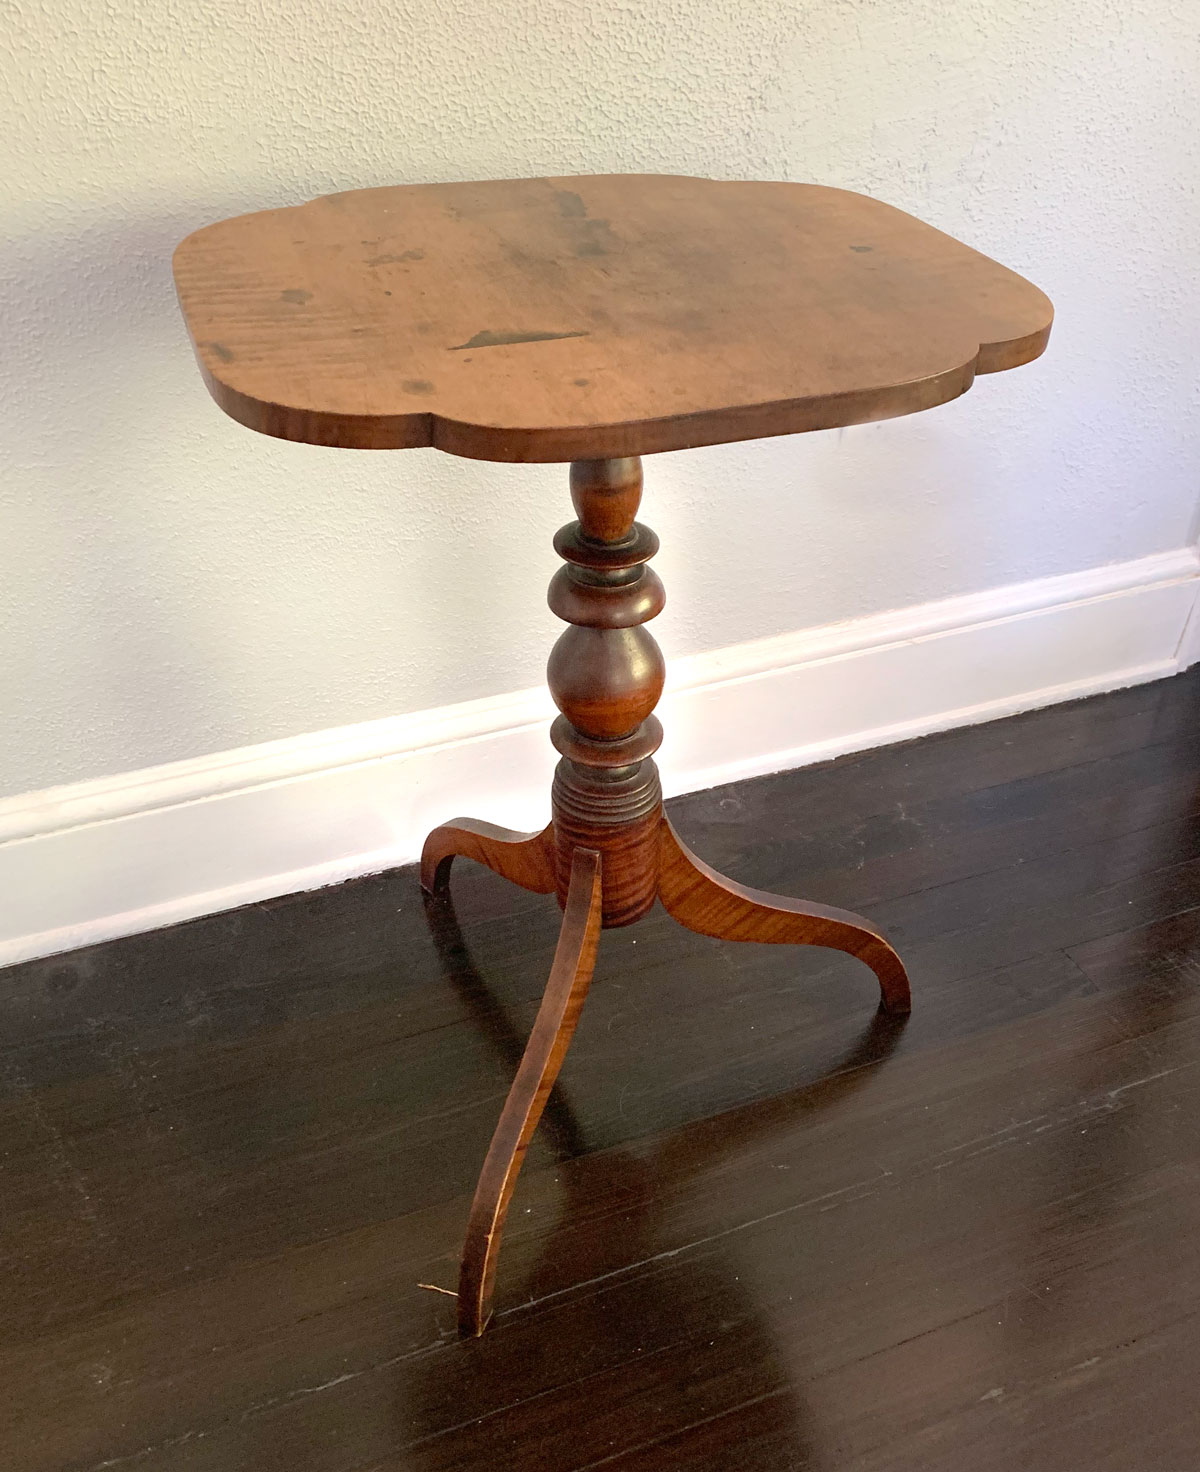 TIGER MAPLE CANDLE STAND: American